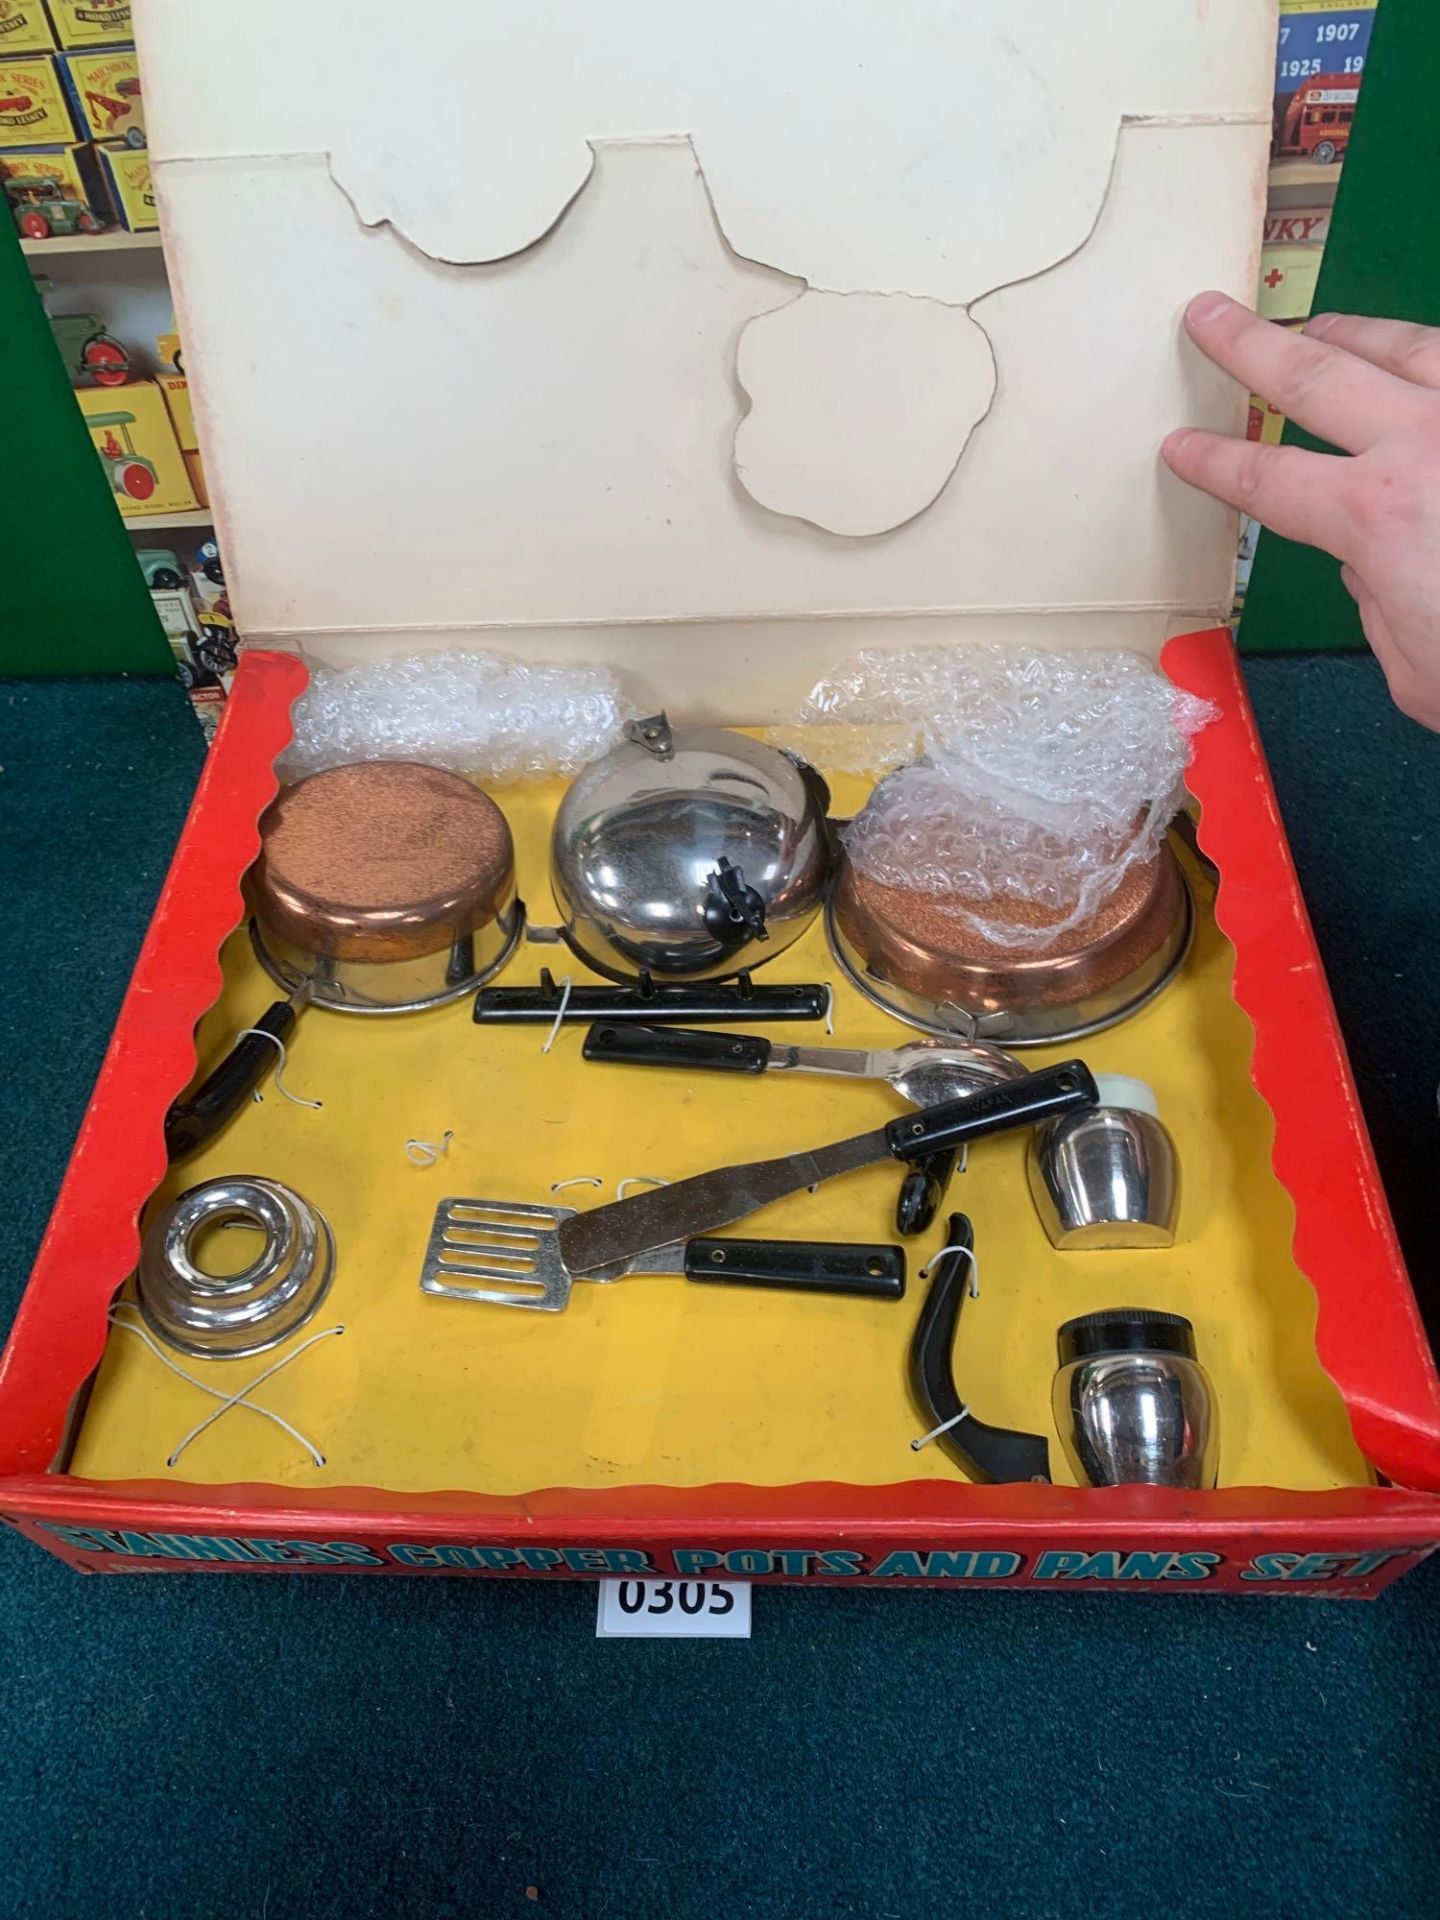 4 X Vintage Toys Crafting Sets And Kitchen Pots And Pans It And Walk Weeding Set A Craft Master - Image 5 of 10